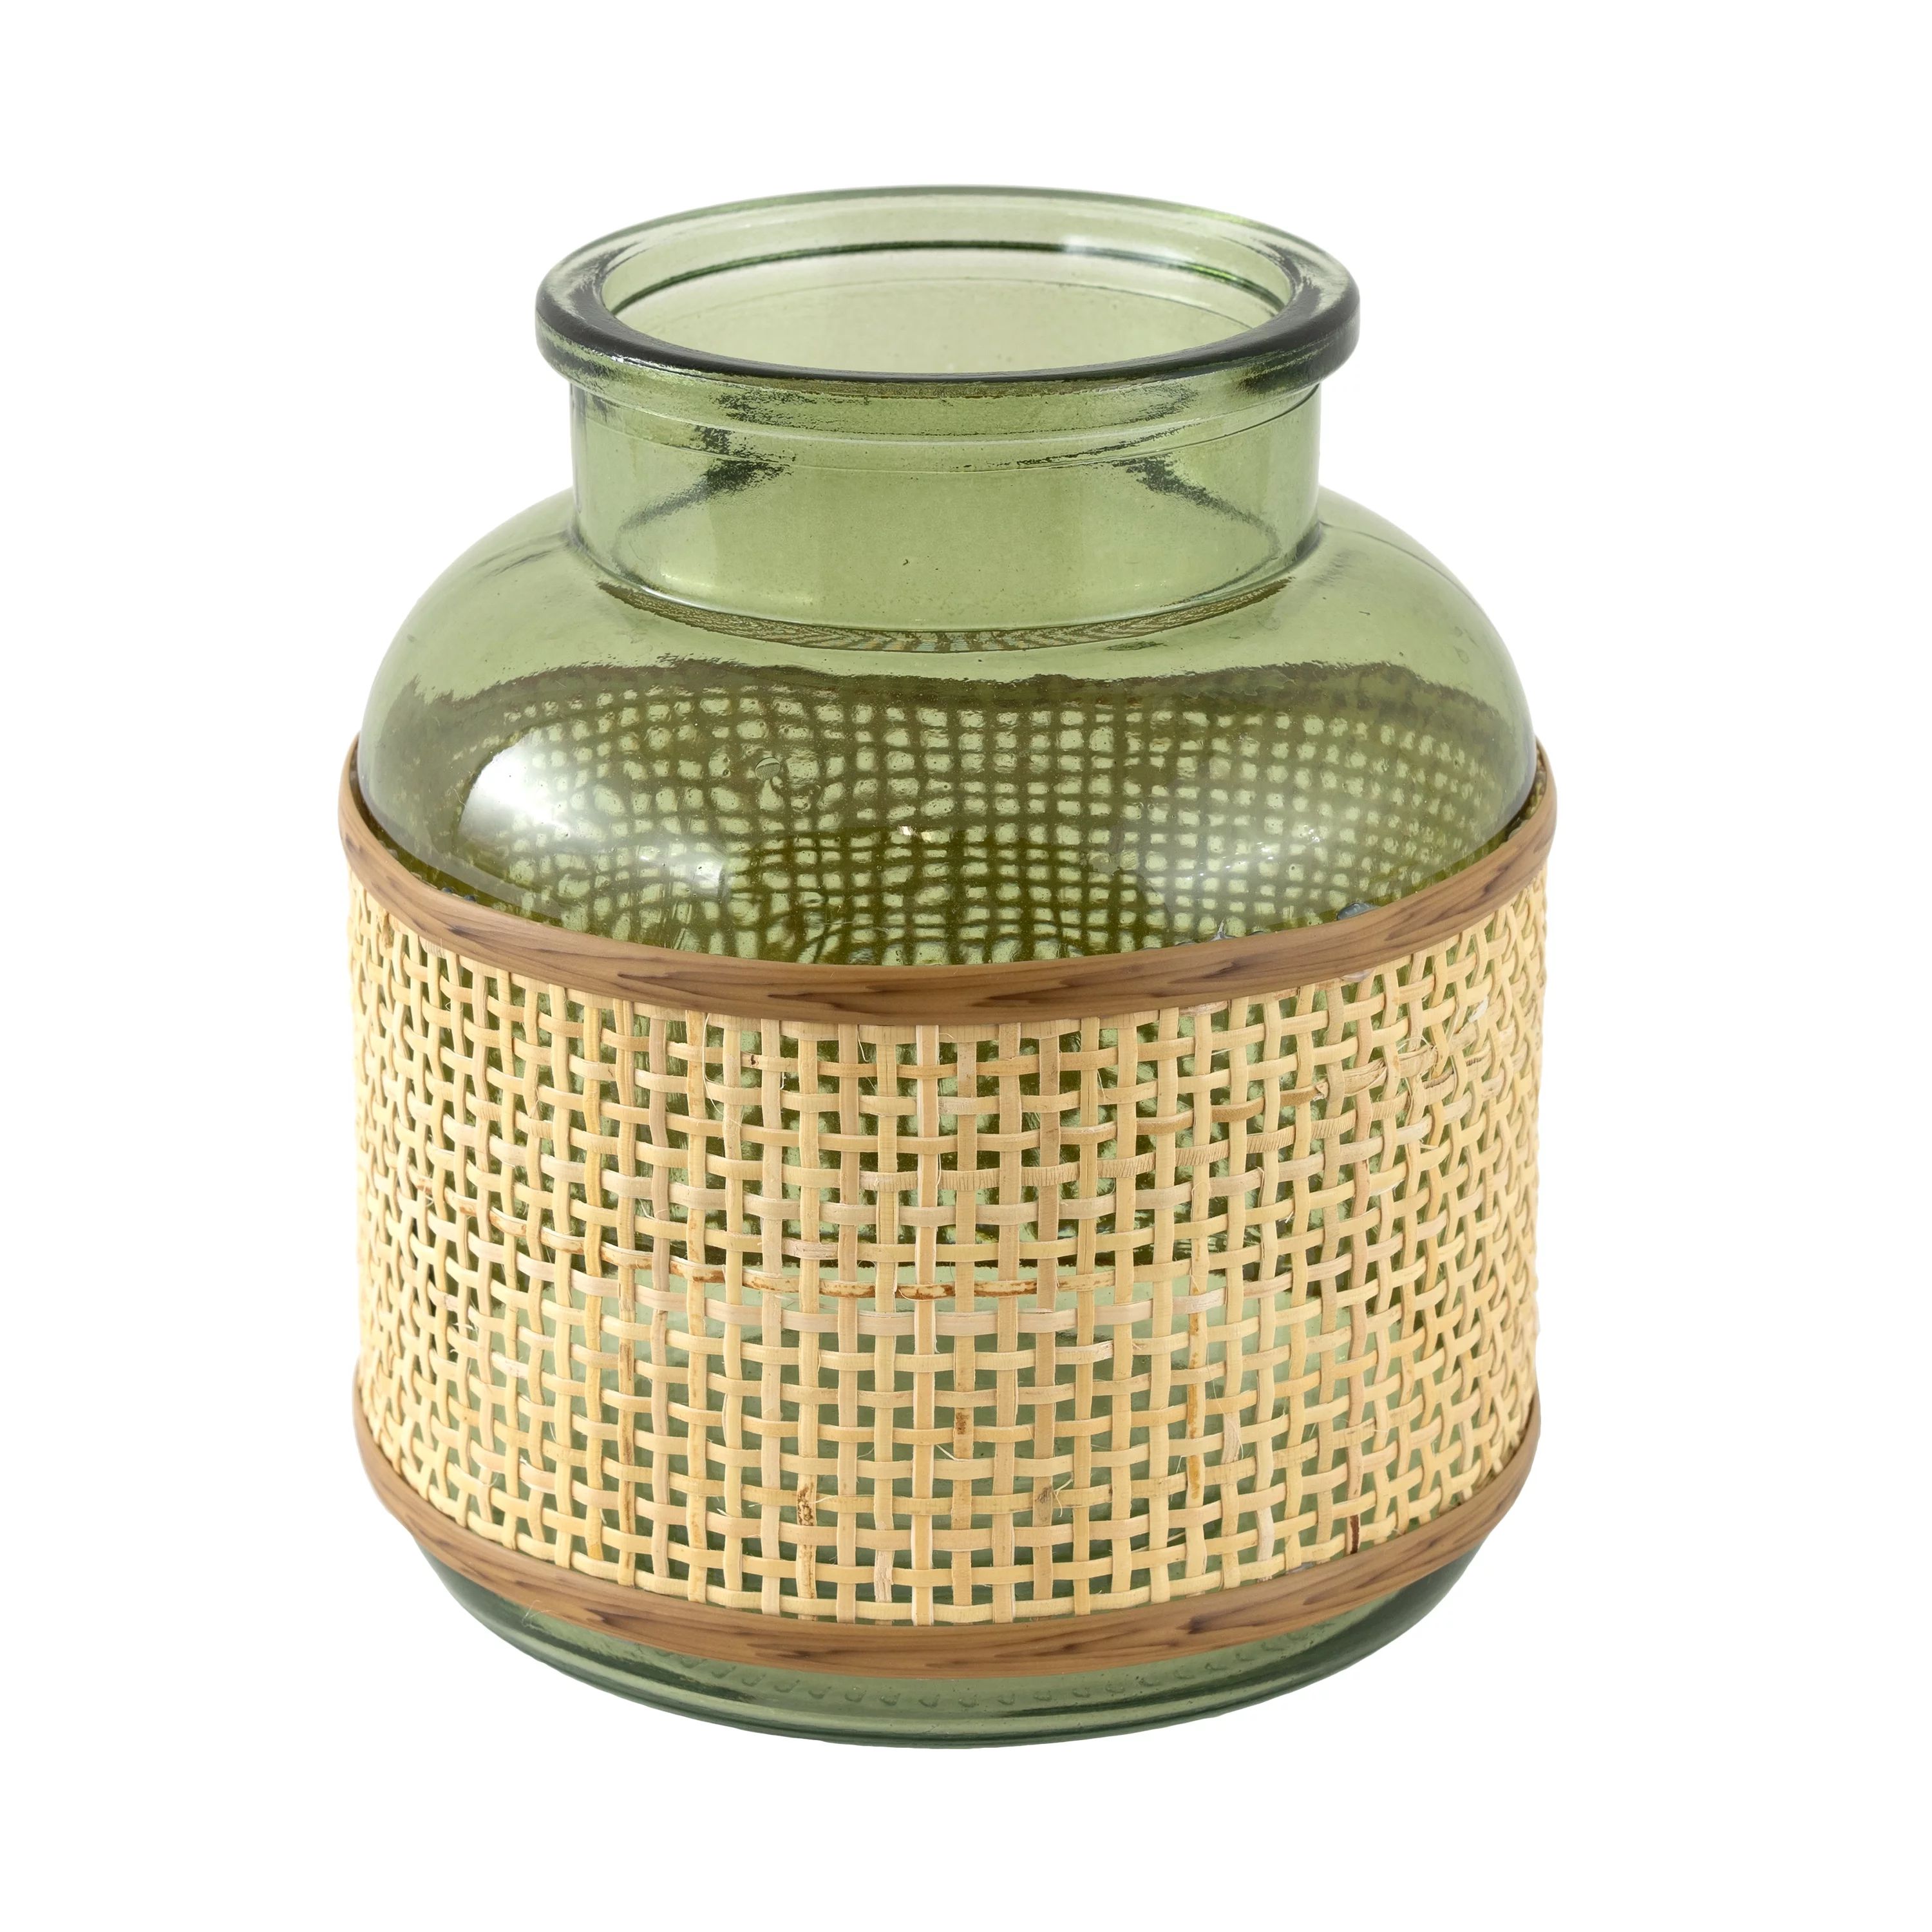 6" Green Translucent Glass Indoor Tabletop Vase with Natural Rattan Caning Wrap | Walmart (US)